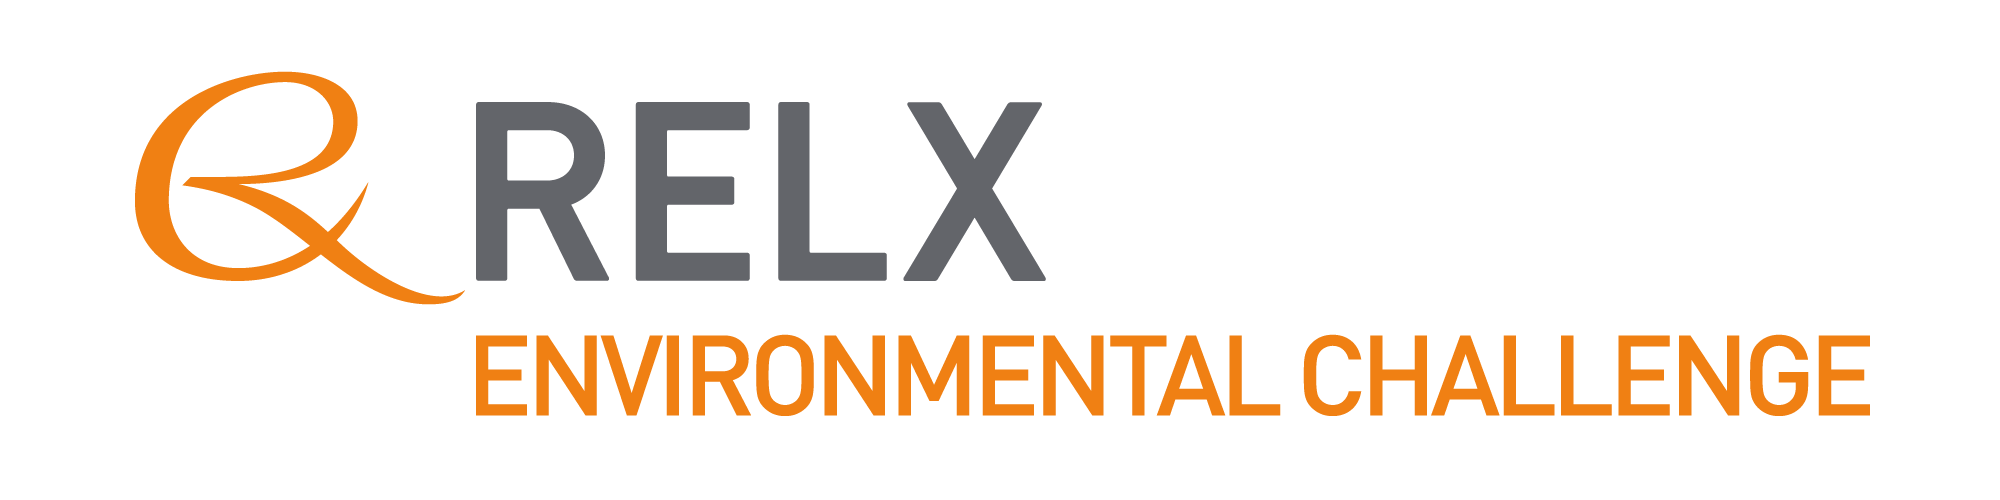 The RELX Environmental Challenge 2021 is now open for applications.The RELX Environmental Challenge awards projects that best demonstrate how th...